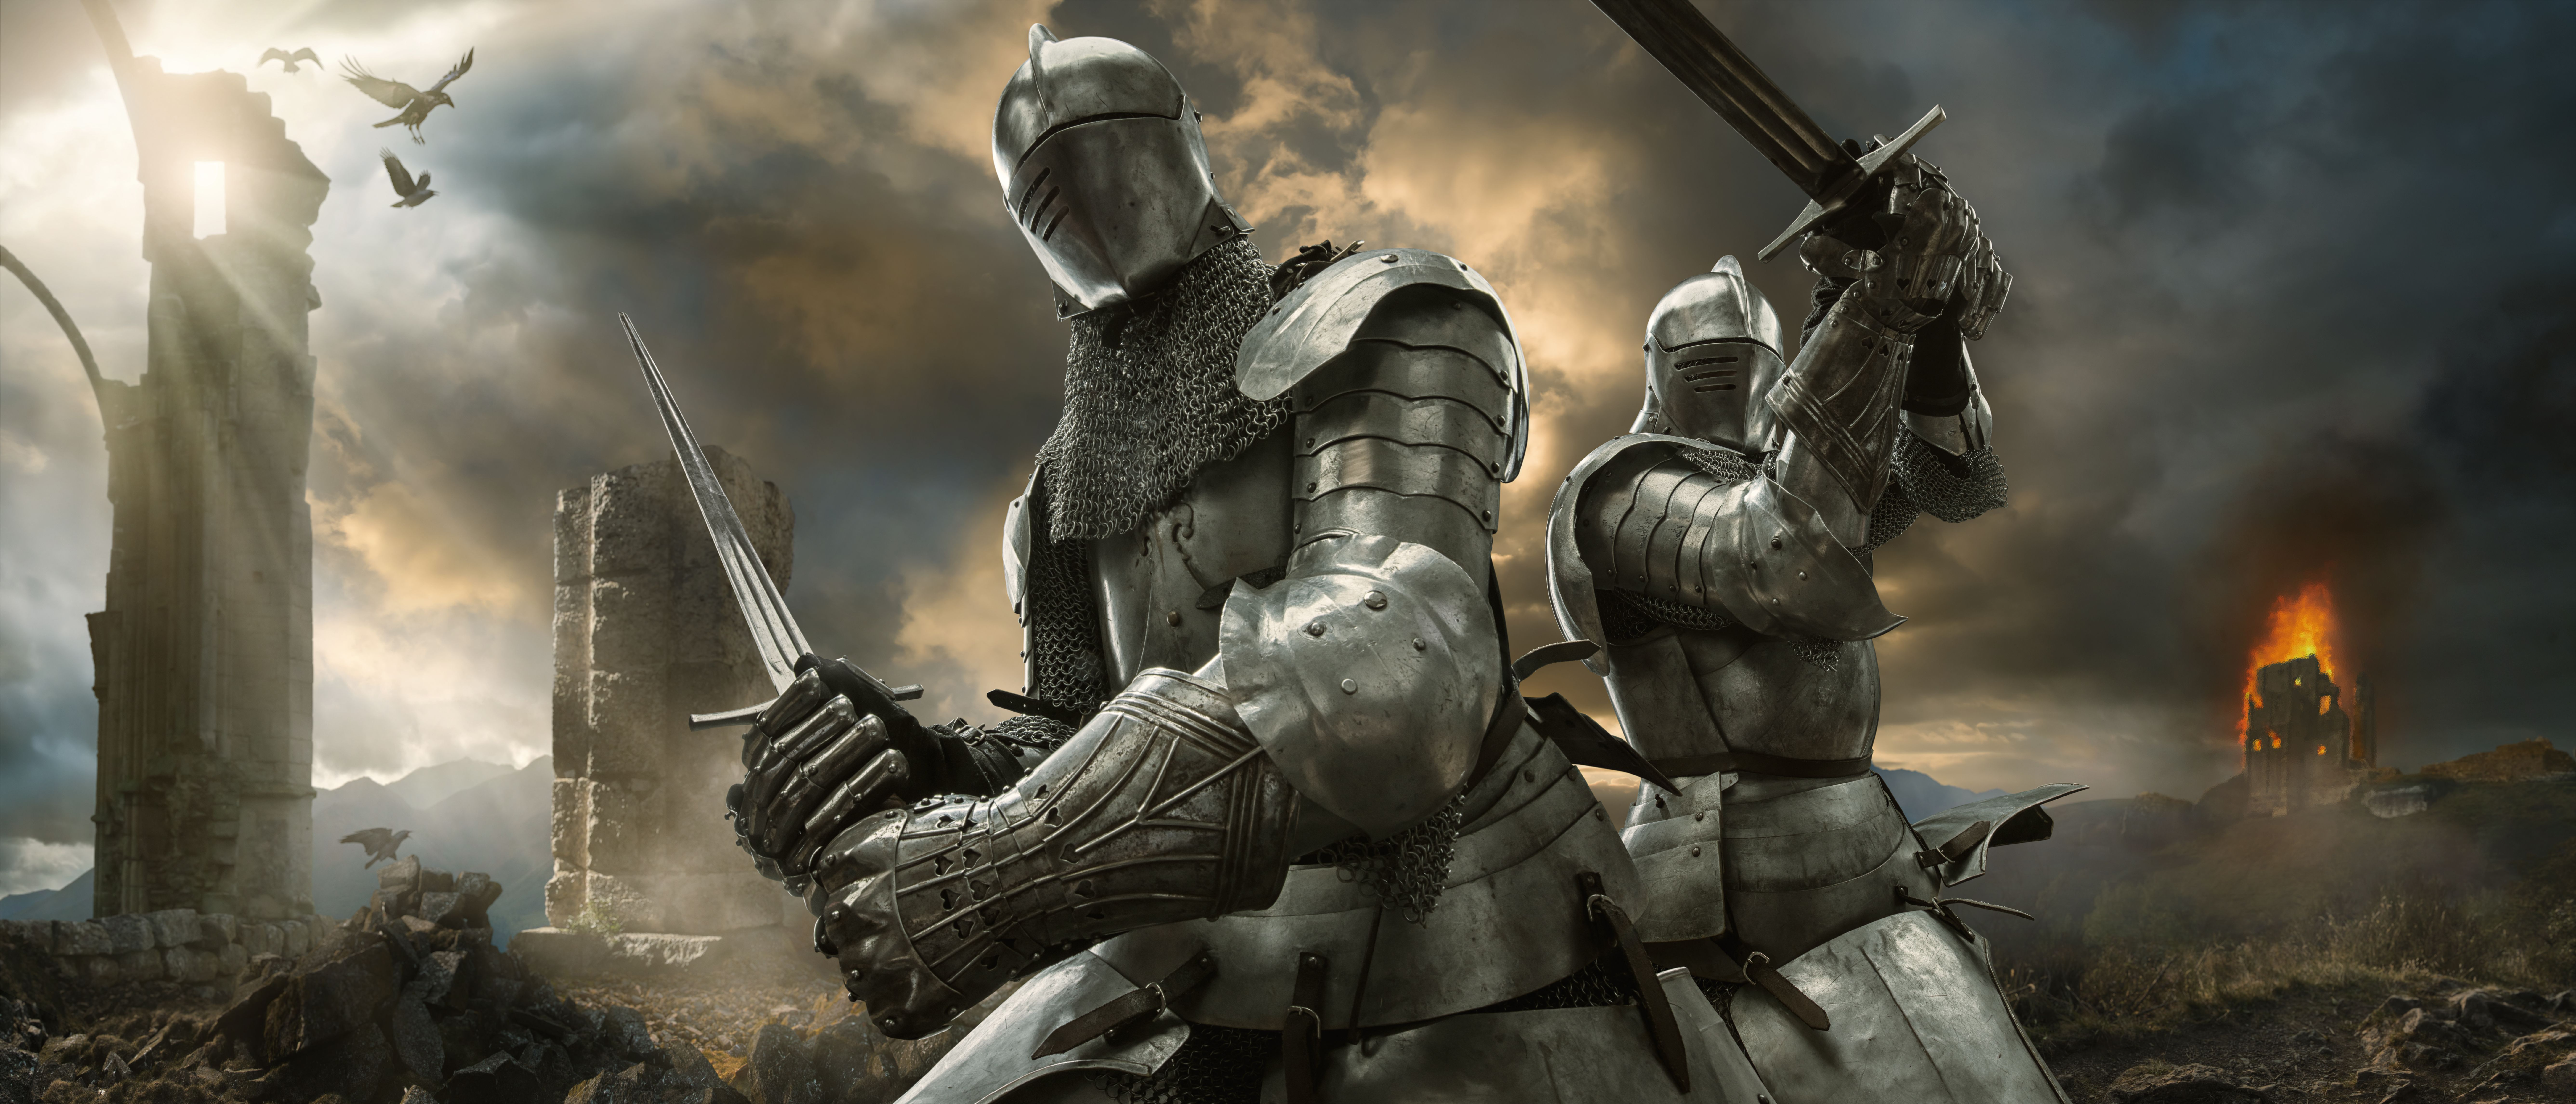 The Knights Templar 10k 8k HD 4k Wallpaper, Image, Background, Photo and Picture